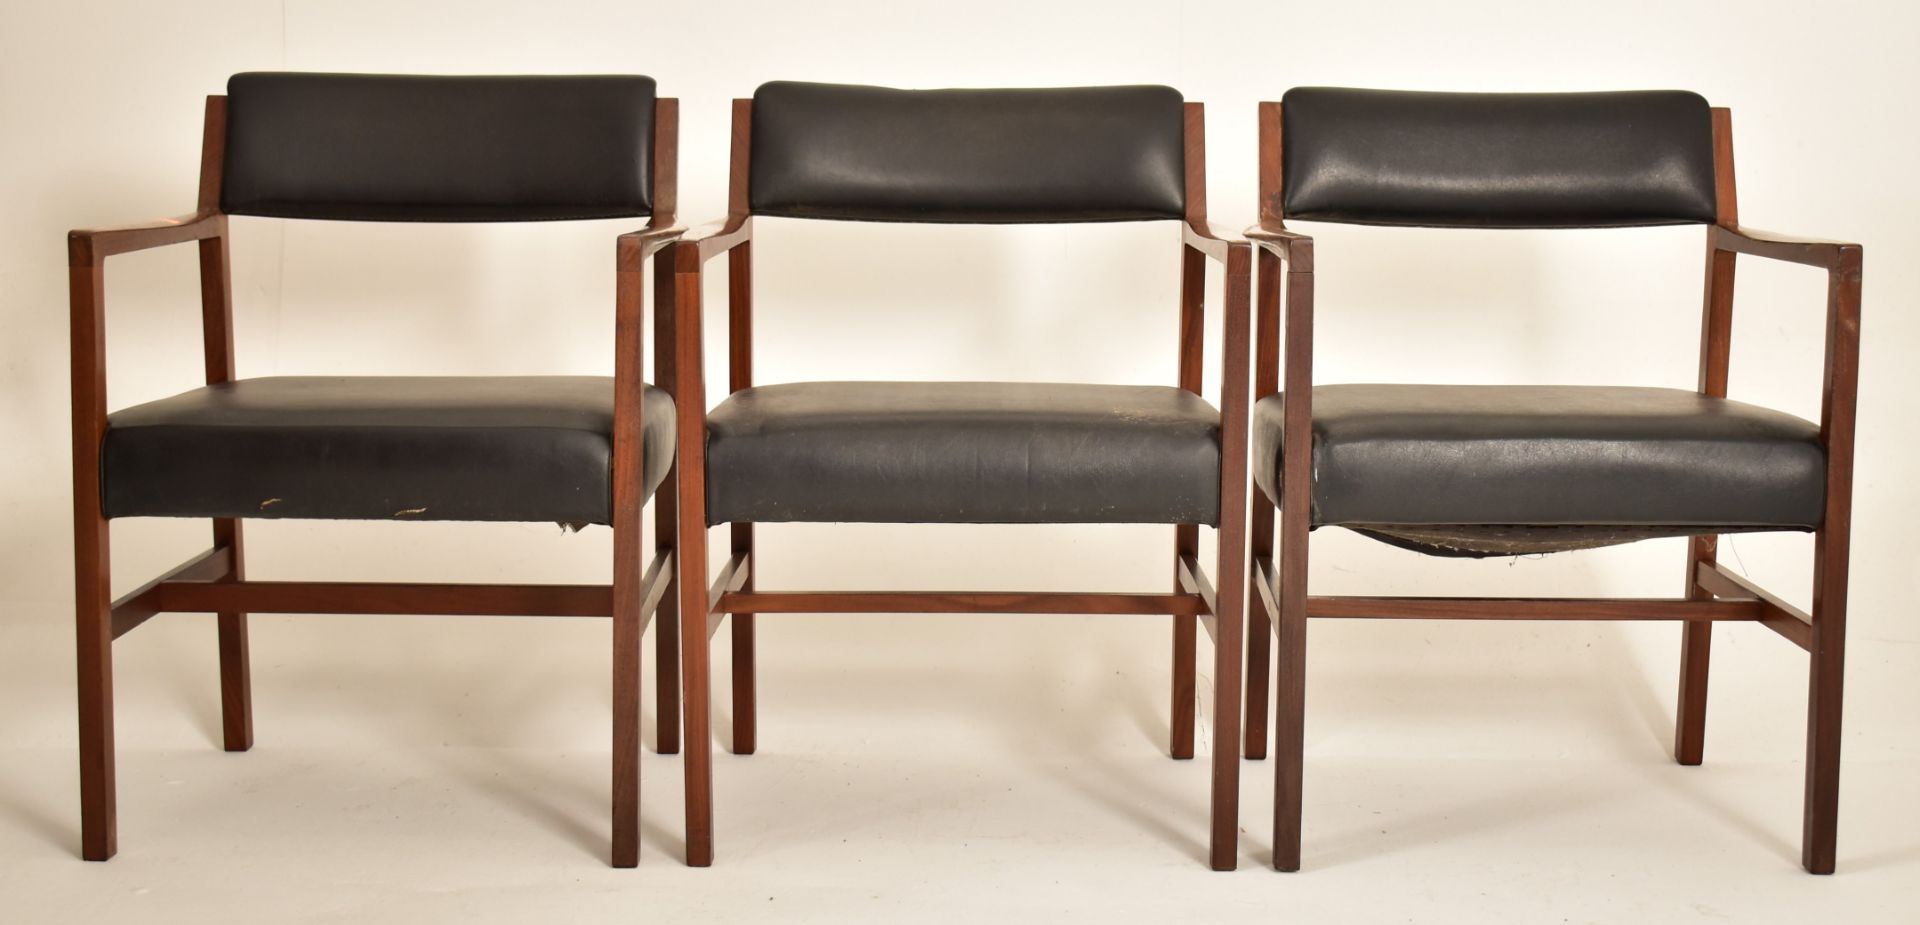 ALFRED COX - MATCHING SET OF SIX TEAK DINING CHAIRS - Image 4 of 7